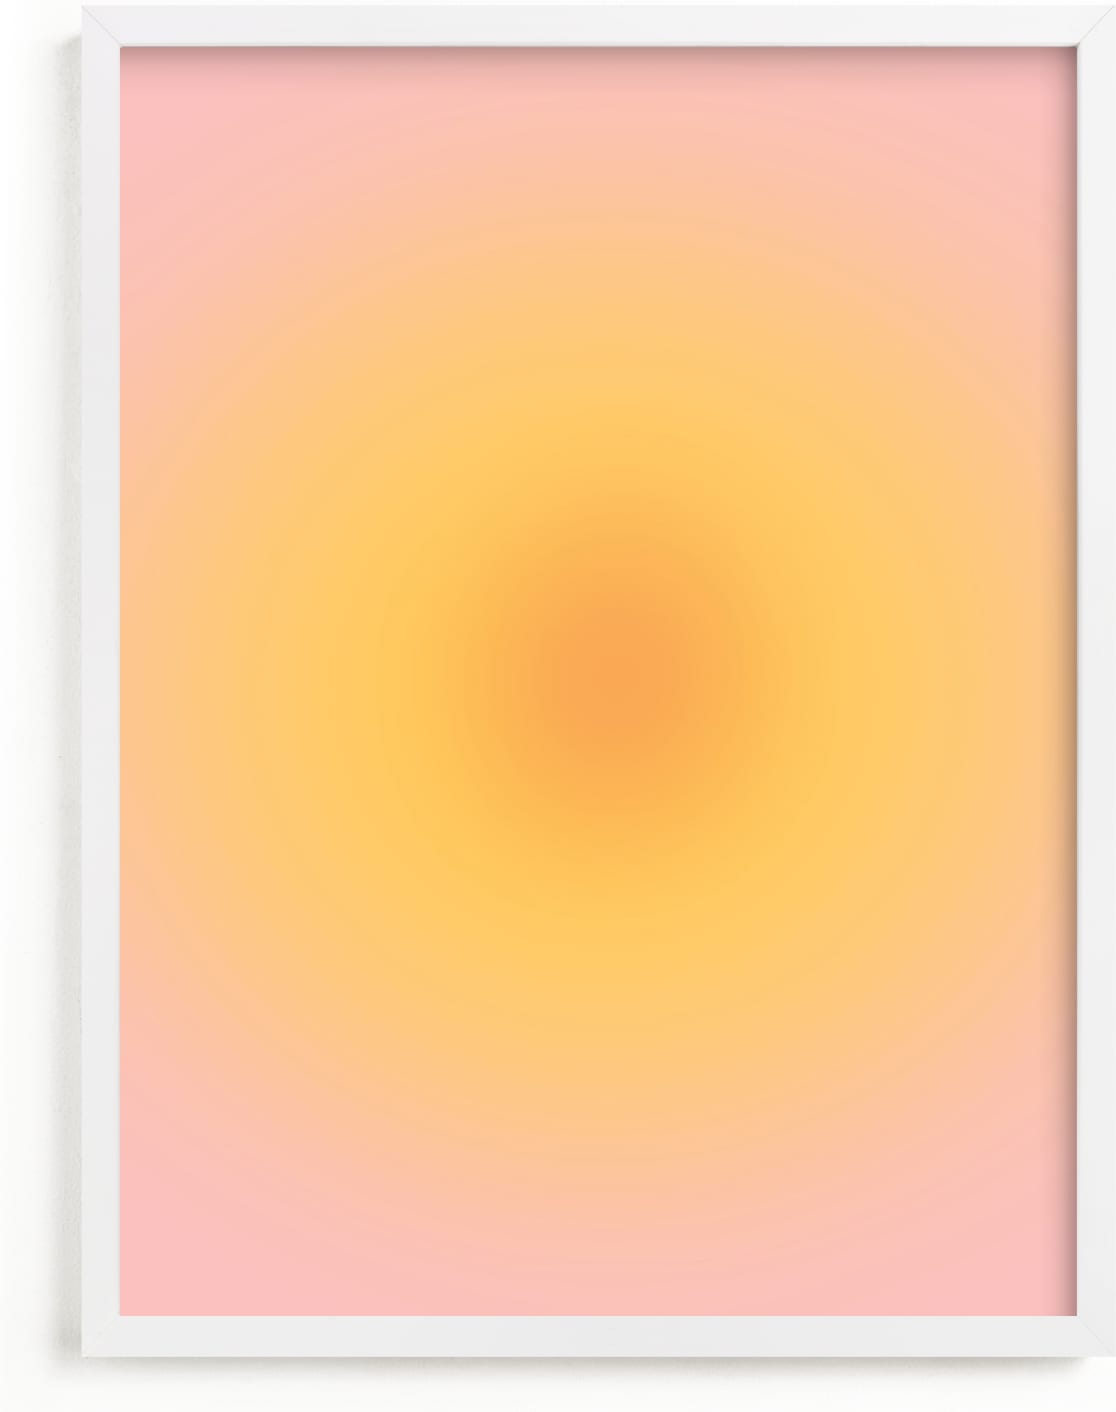 This is a yellow art by Emili Alfieri called Soft Sun.